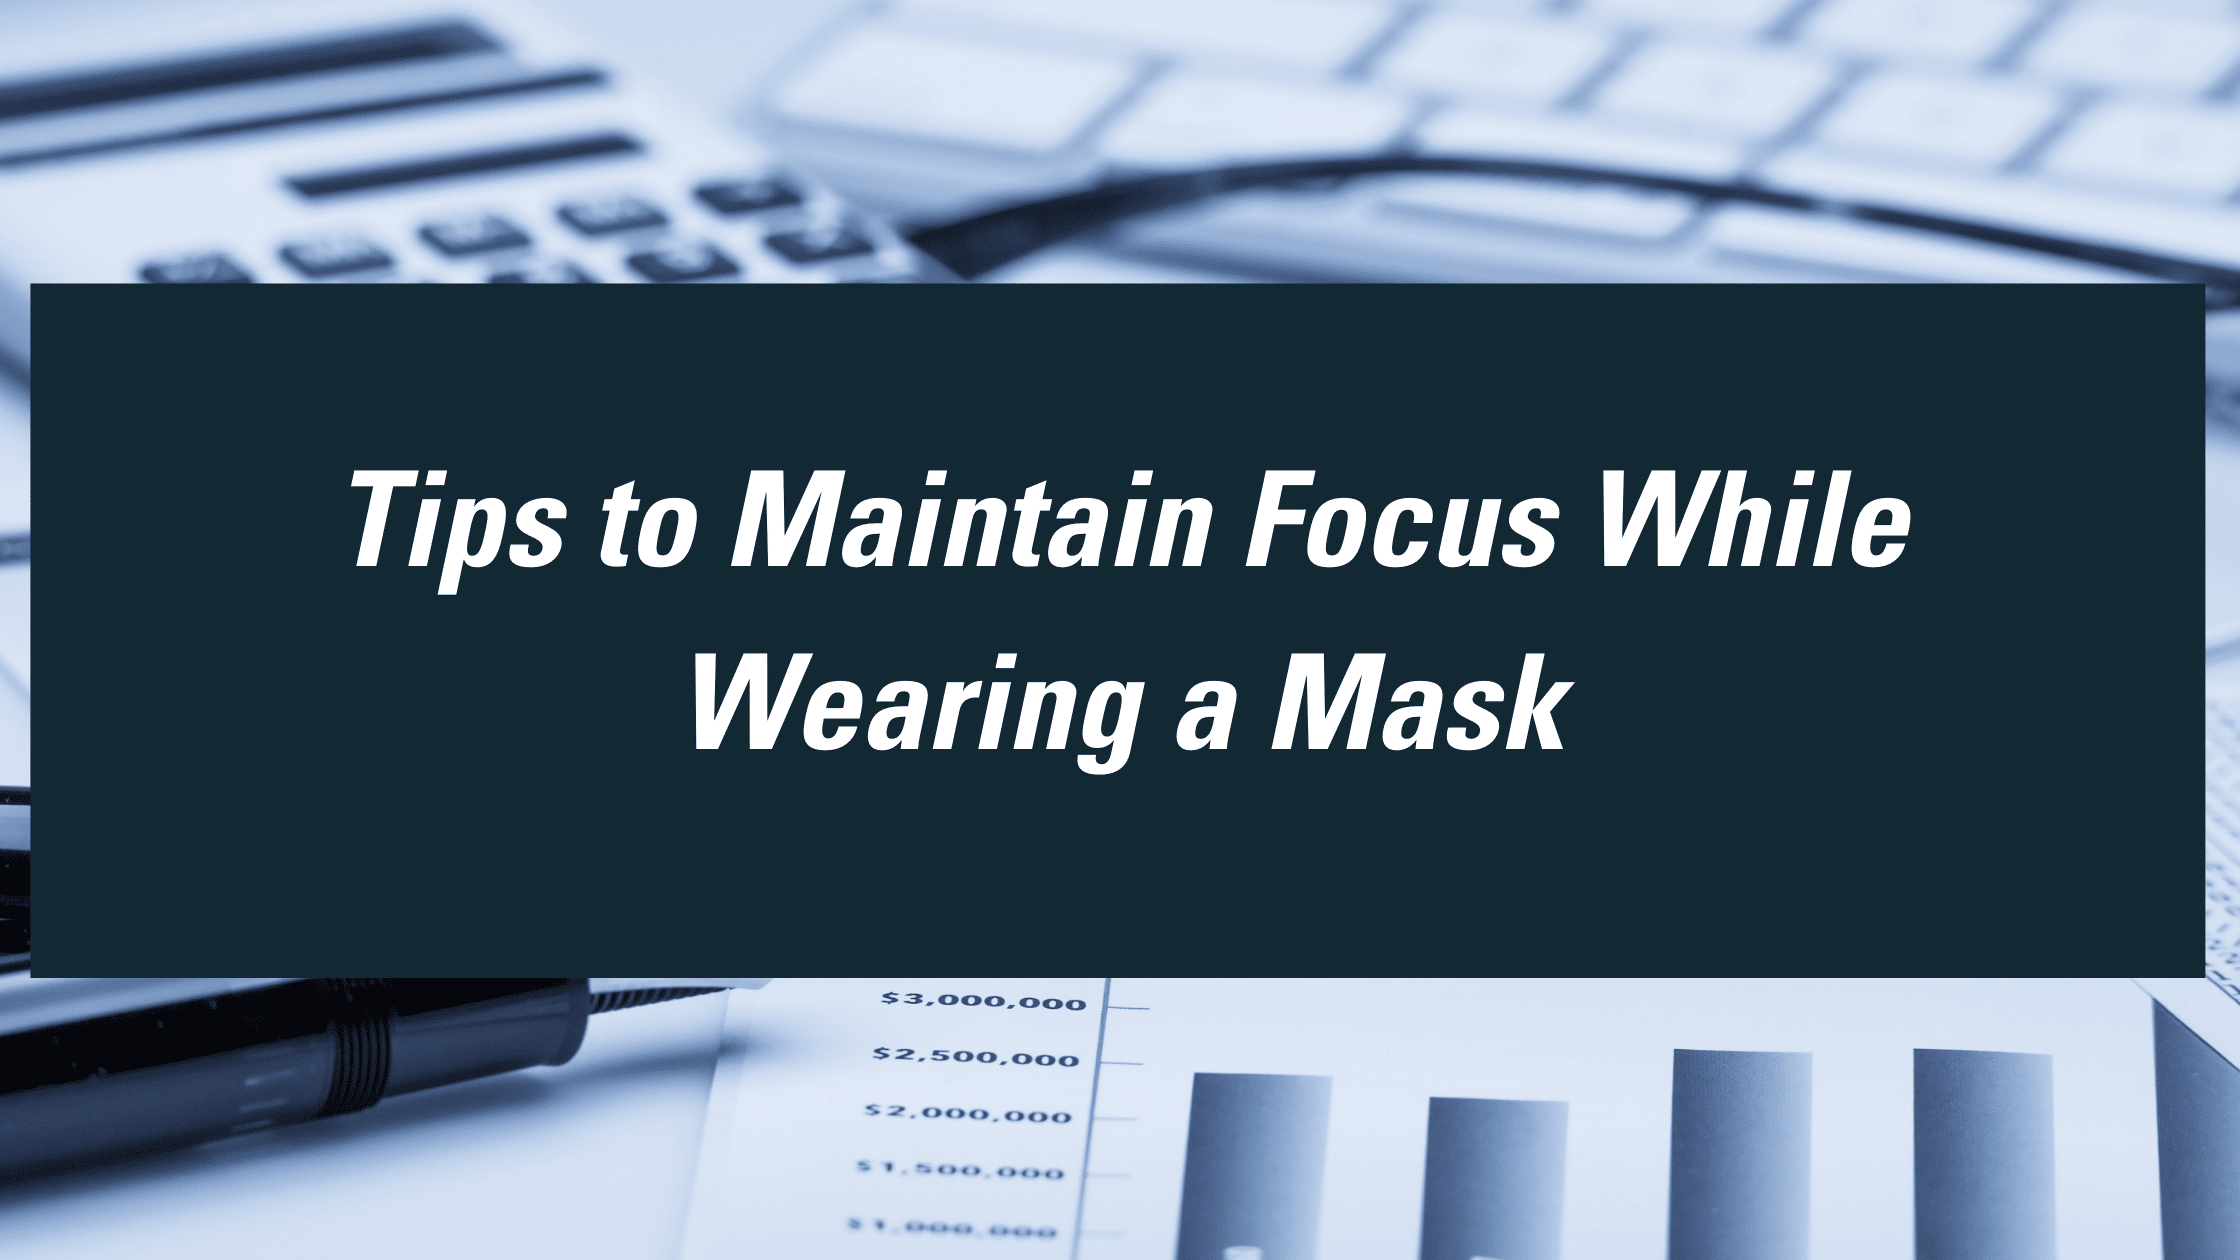 Tips to Maintain Focus While Wearing a Mask